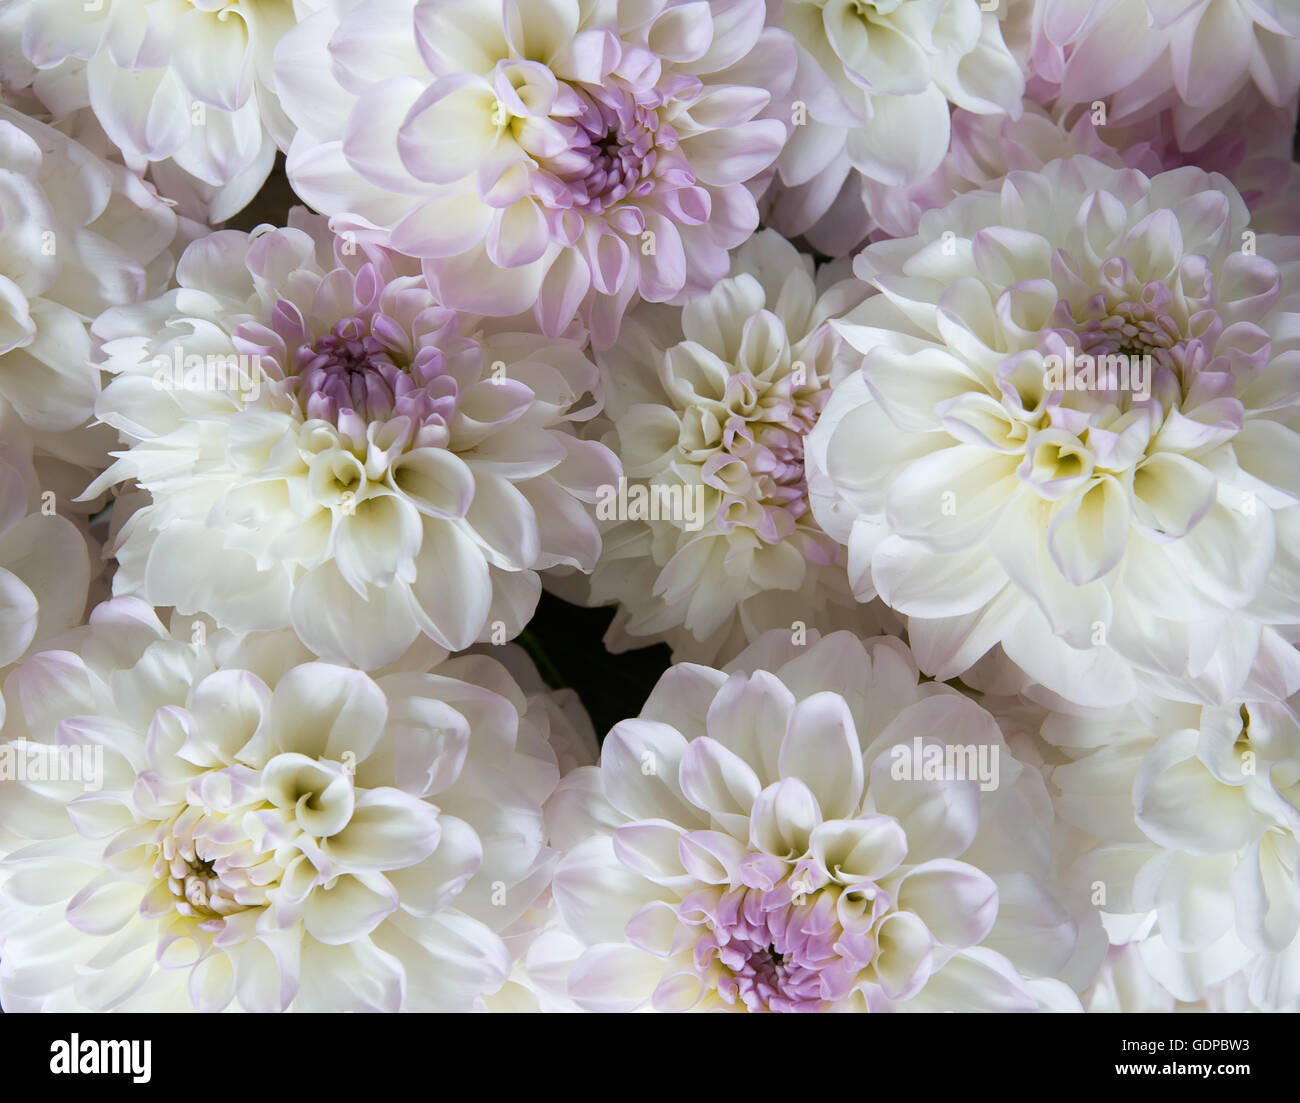 close up of bouquet of white flowers. Stock Photo